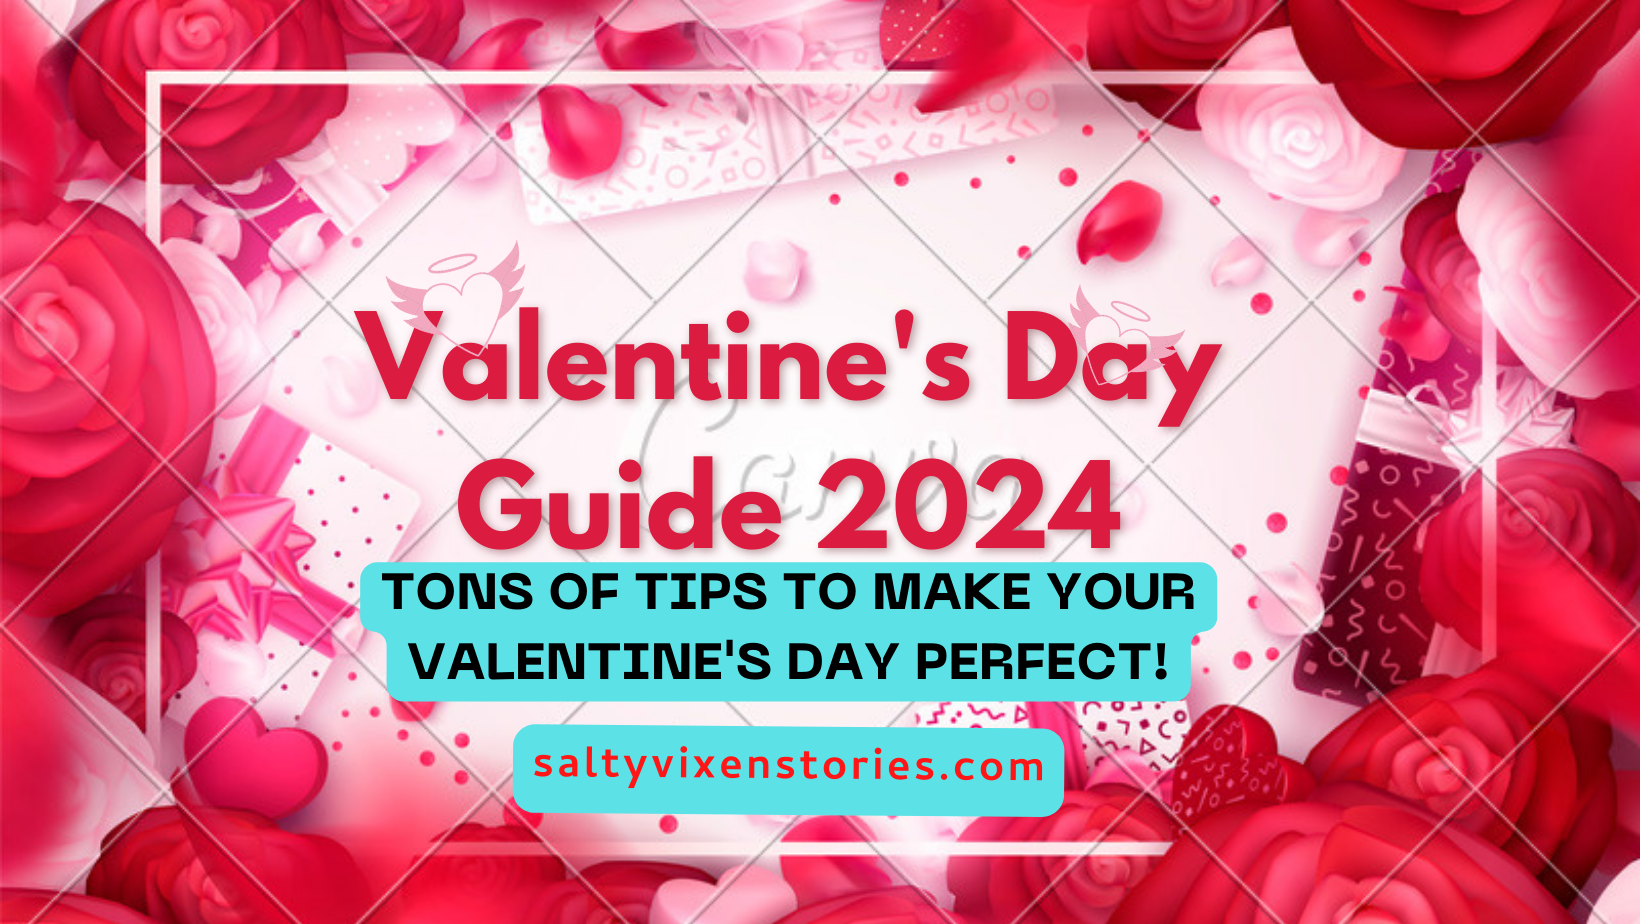 Valentine's Day Guide 2024 Salty Vixen Stories & More